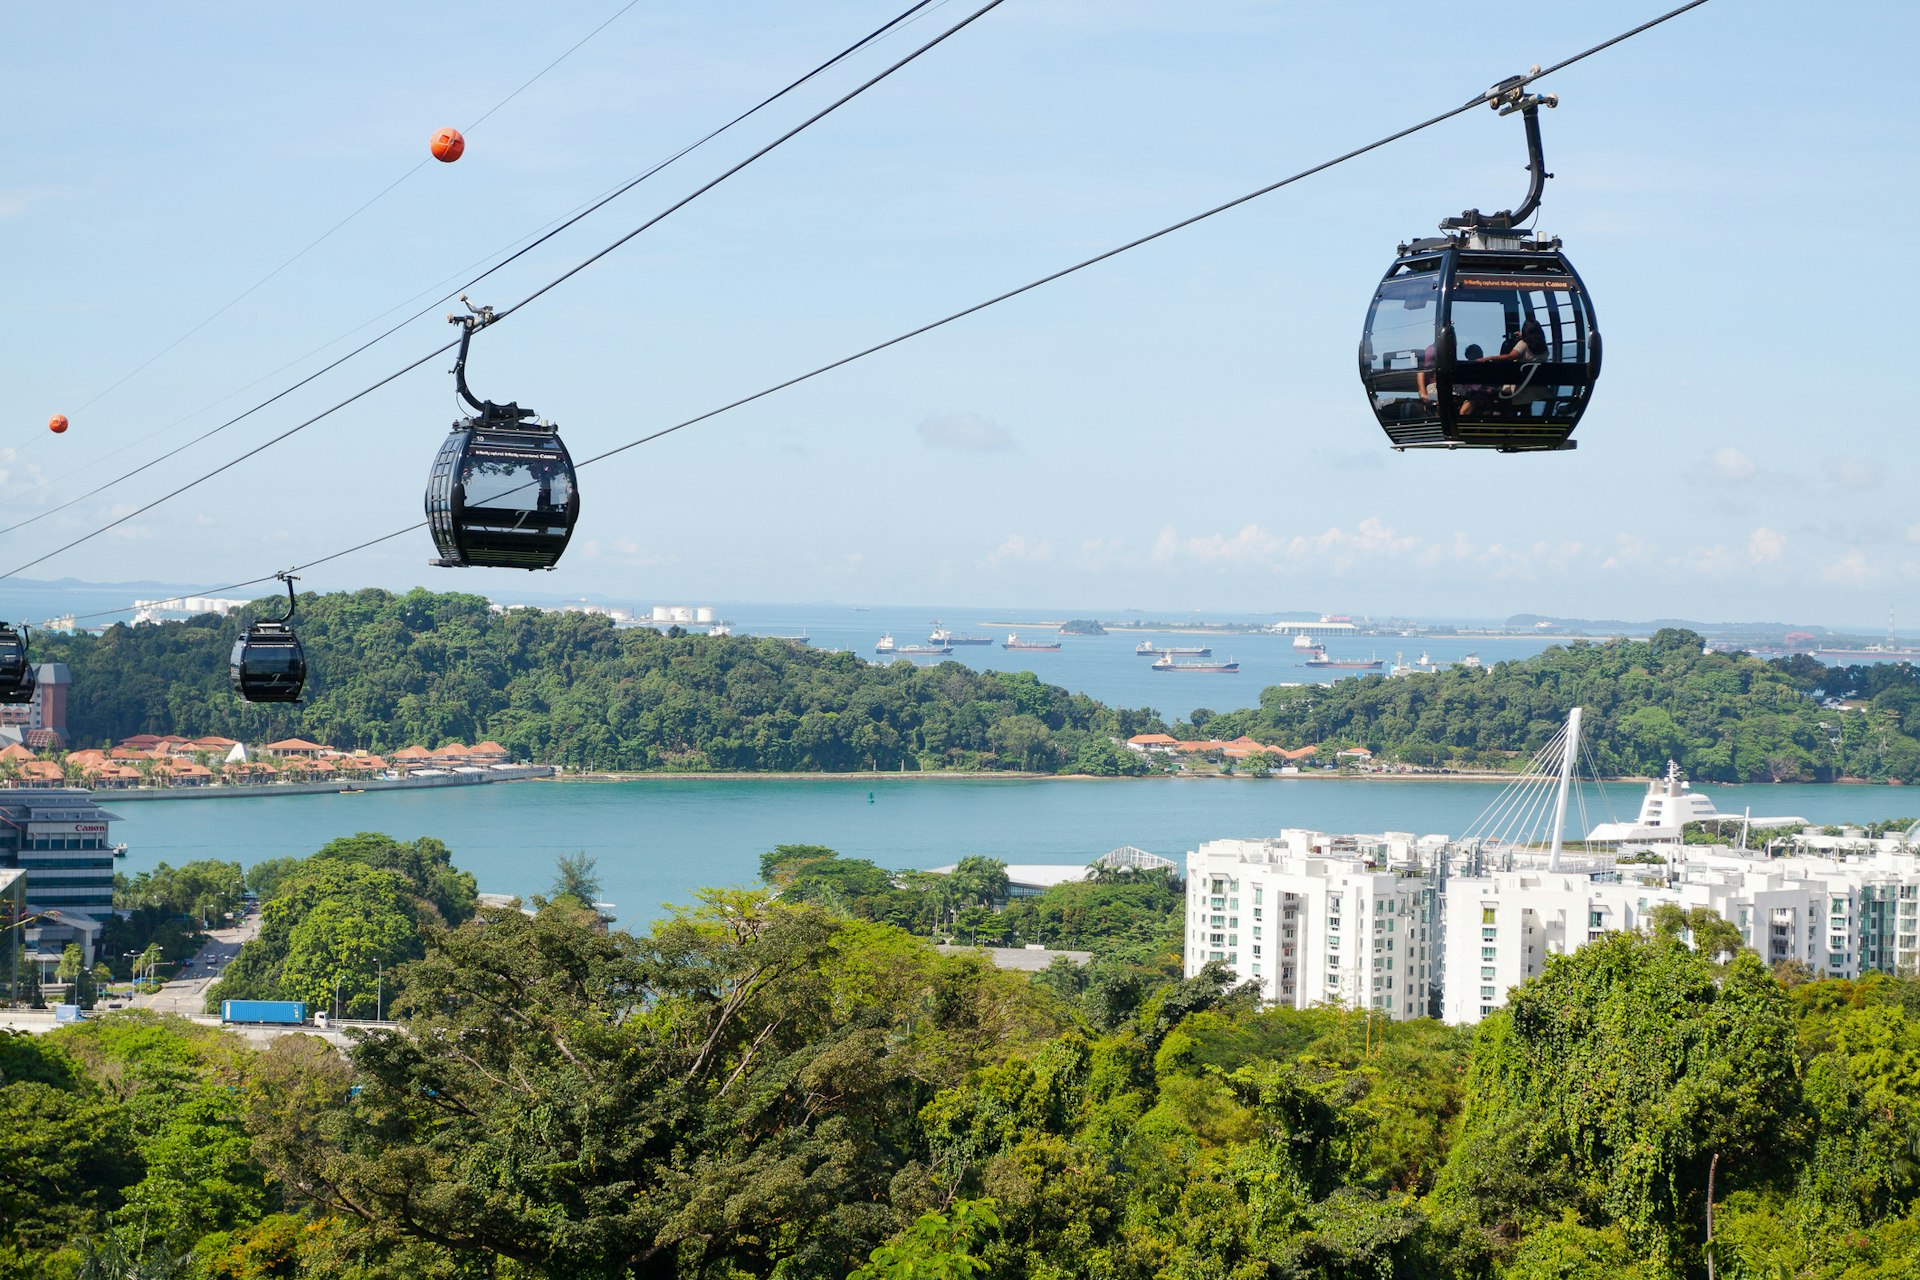 Overhead cable cars at Mount Faber in Singapore